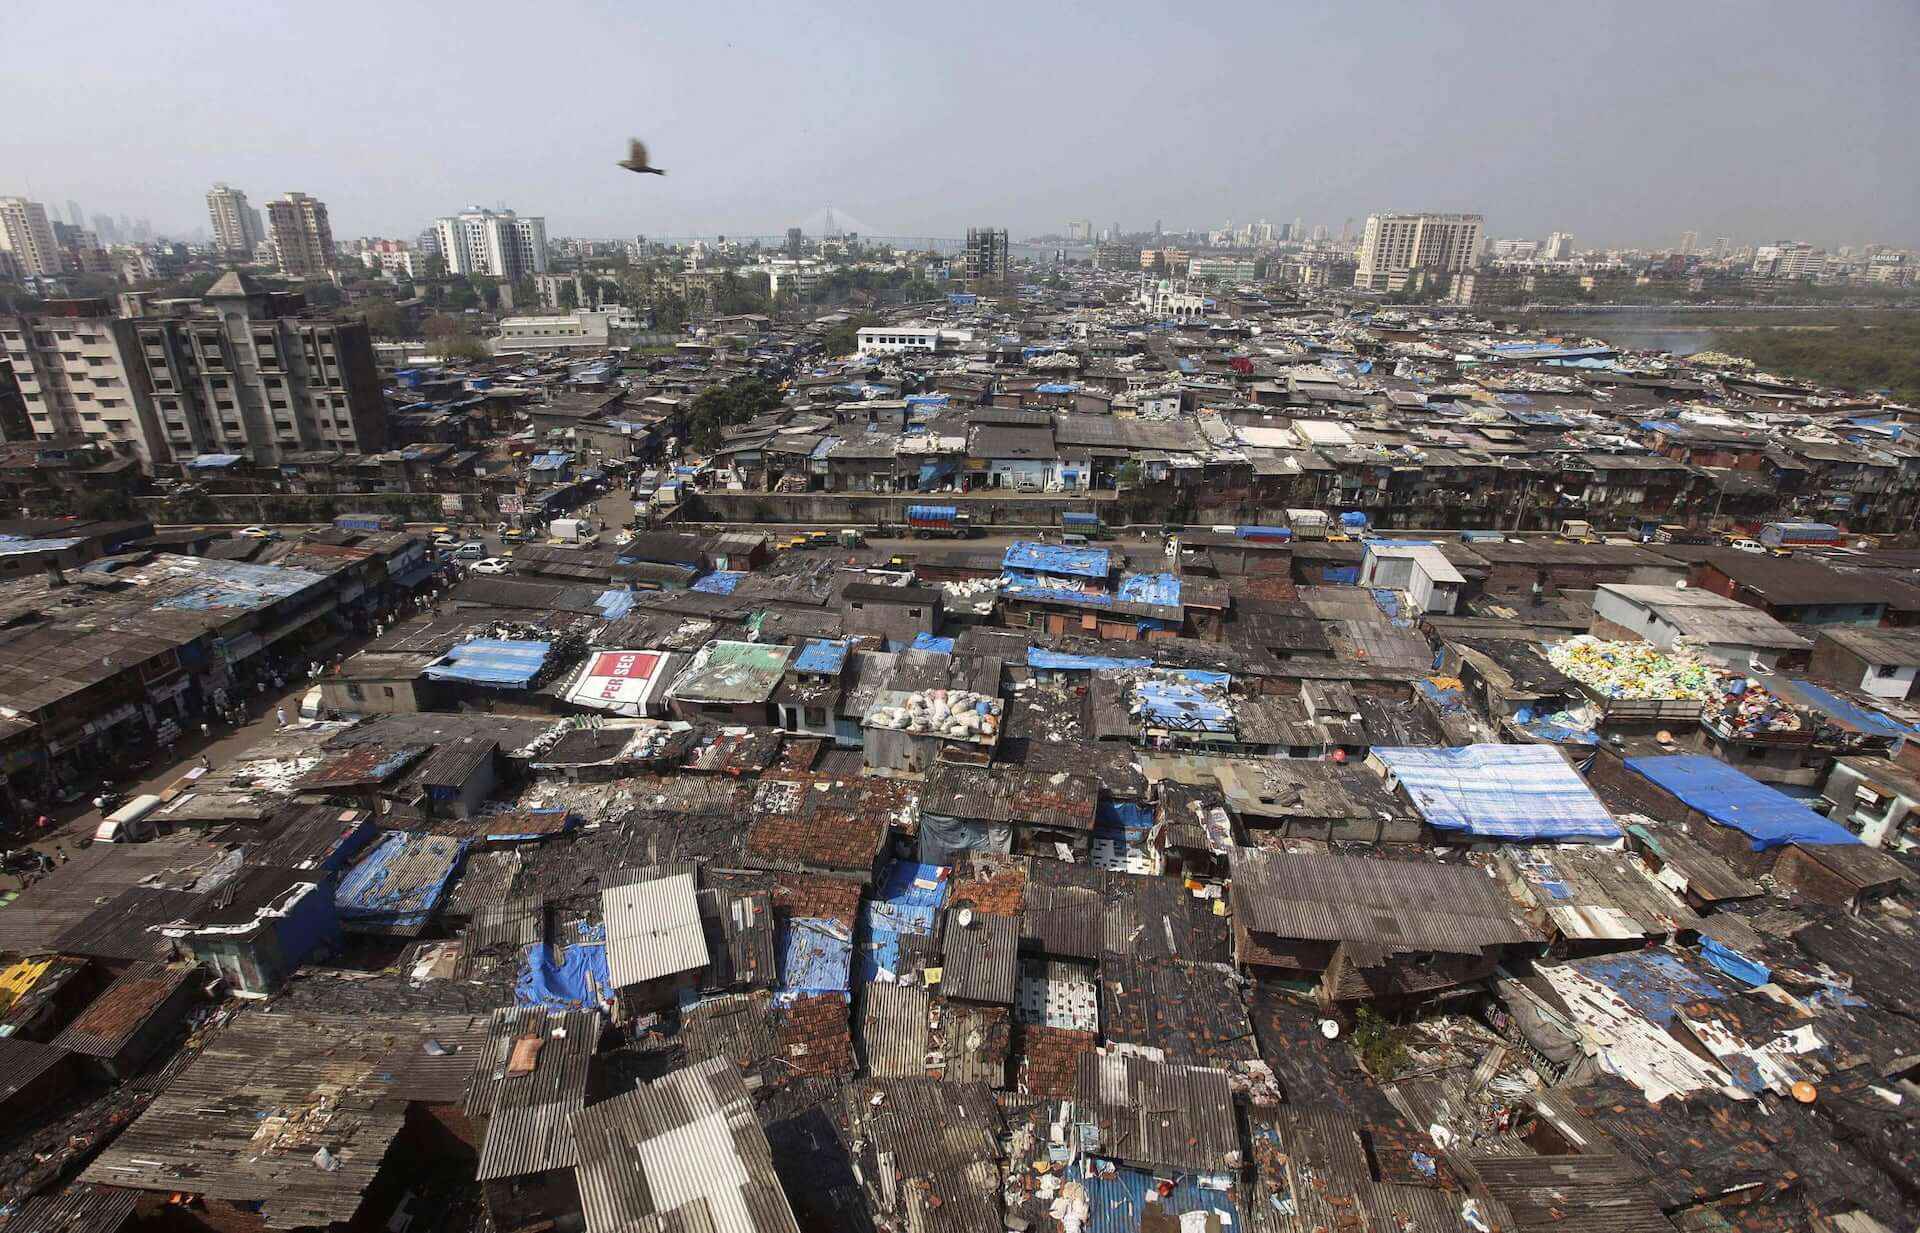 An aerial photo of the slums of Mumbai stretching far into the distance.